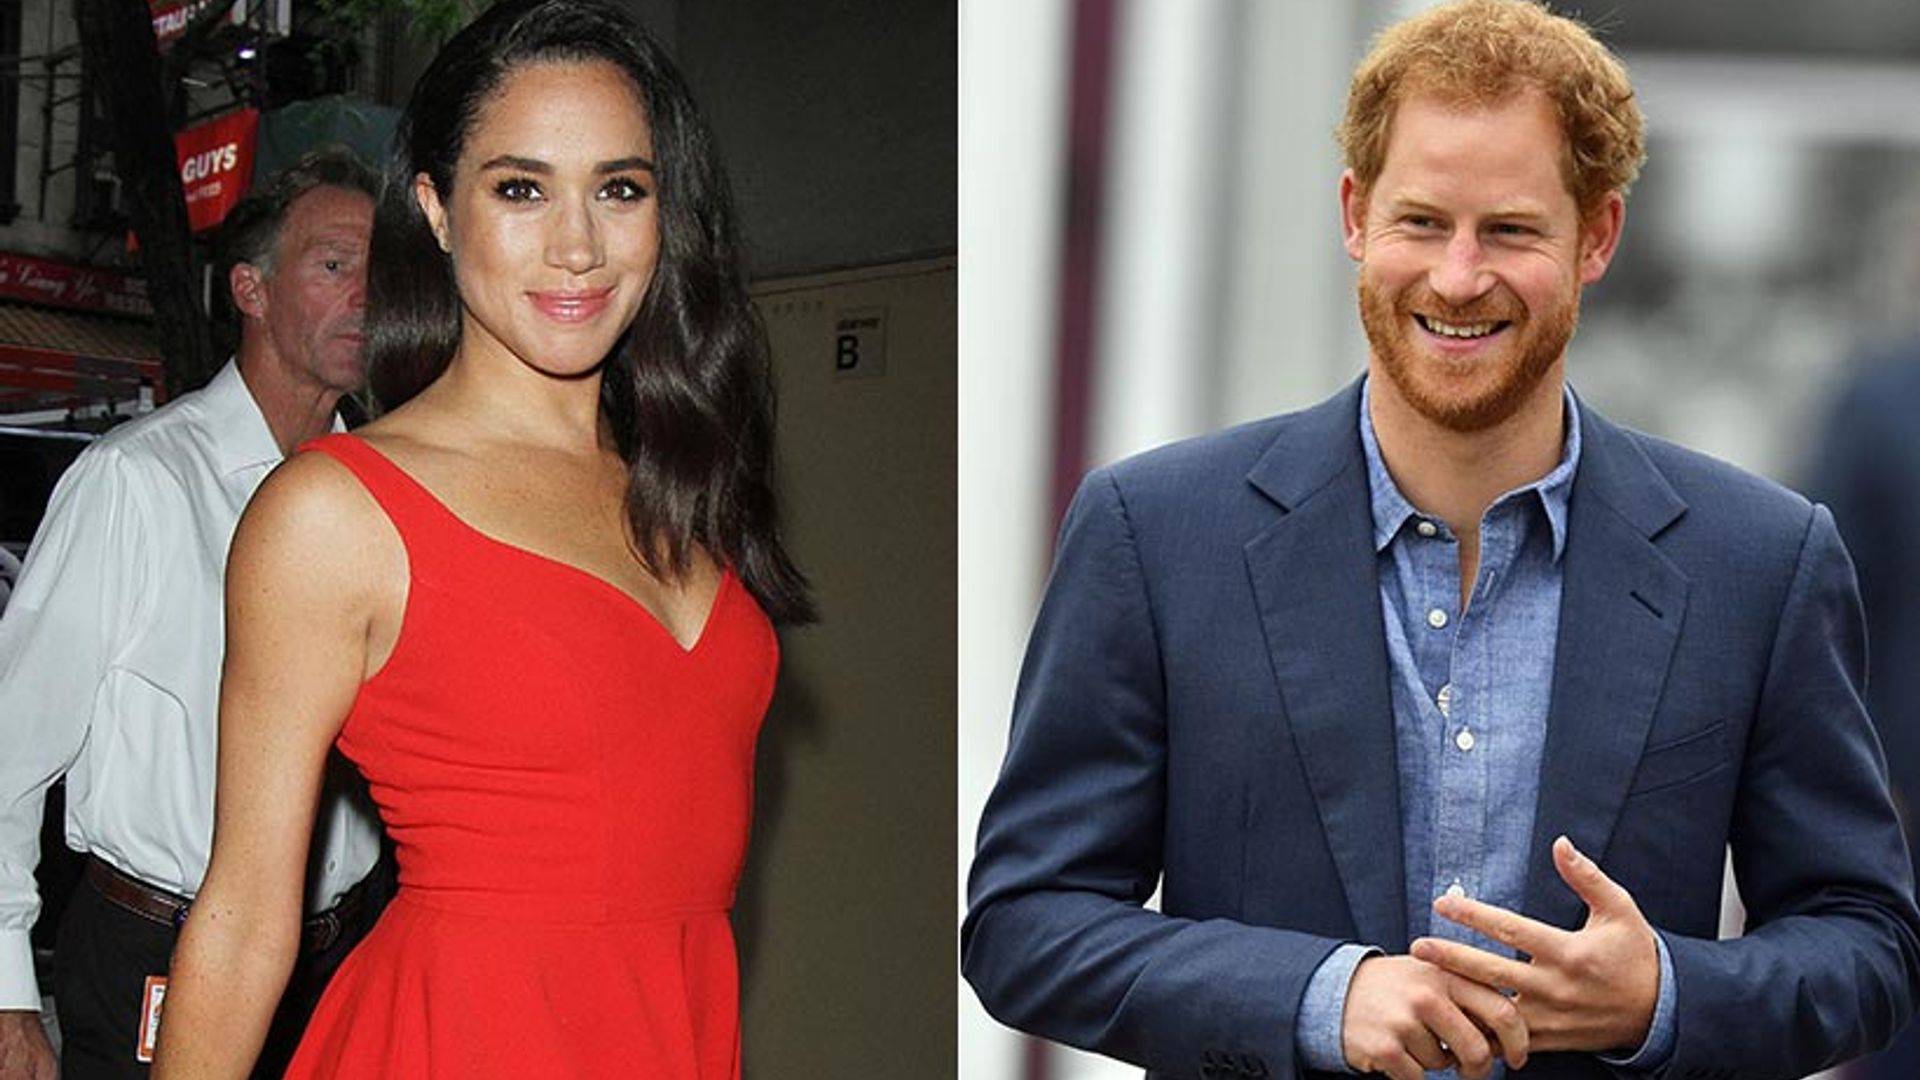 6 reasons why Prince Harry and Meghan Markle are perfect for each other